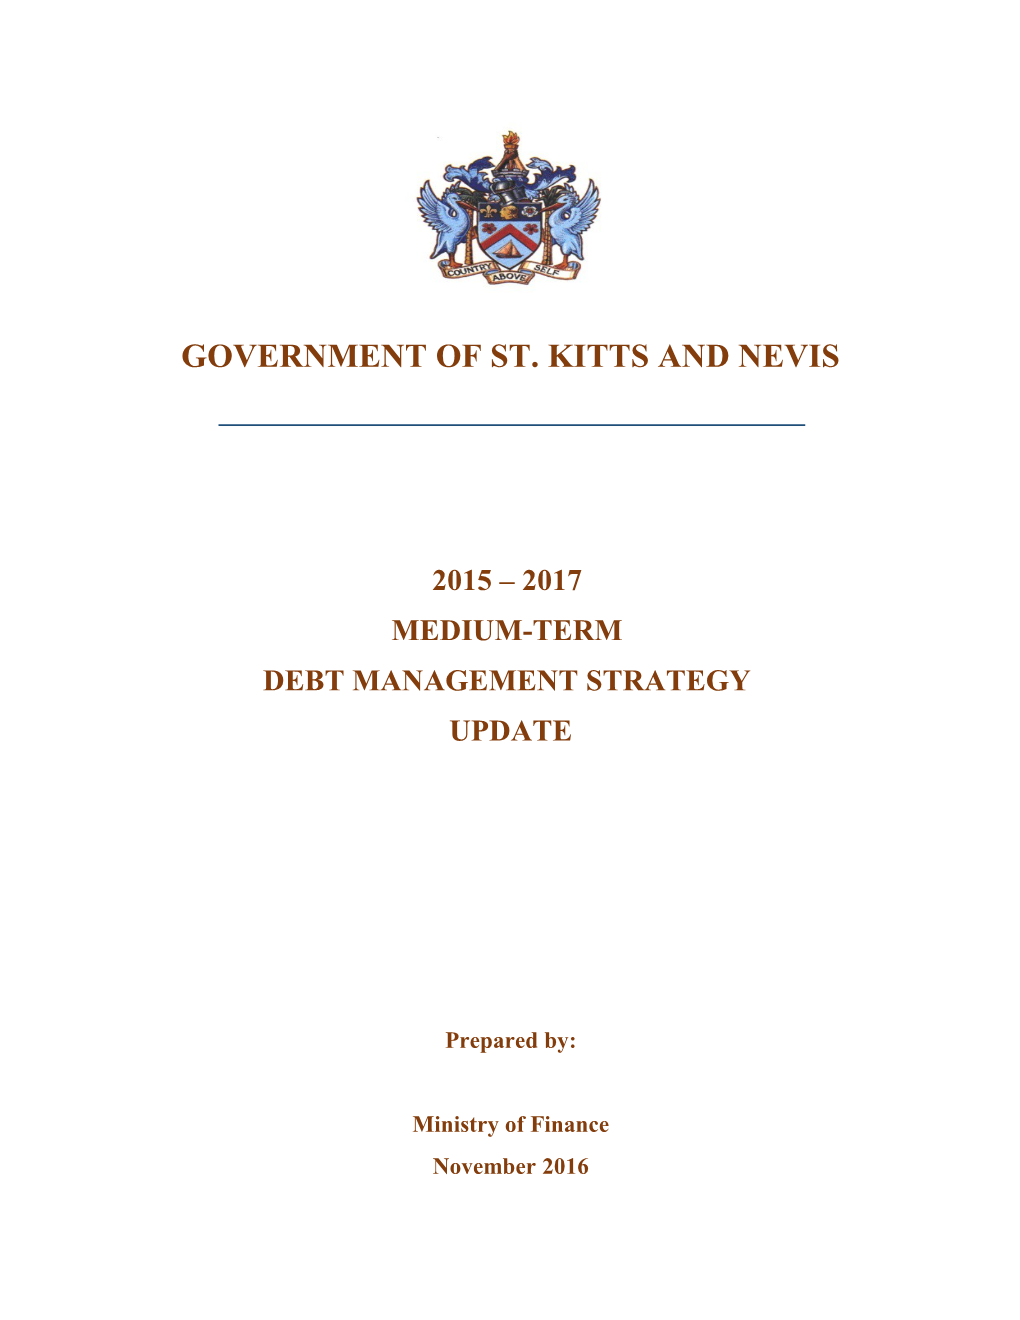 Government of St. Kitts and Nevis